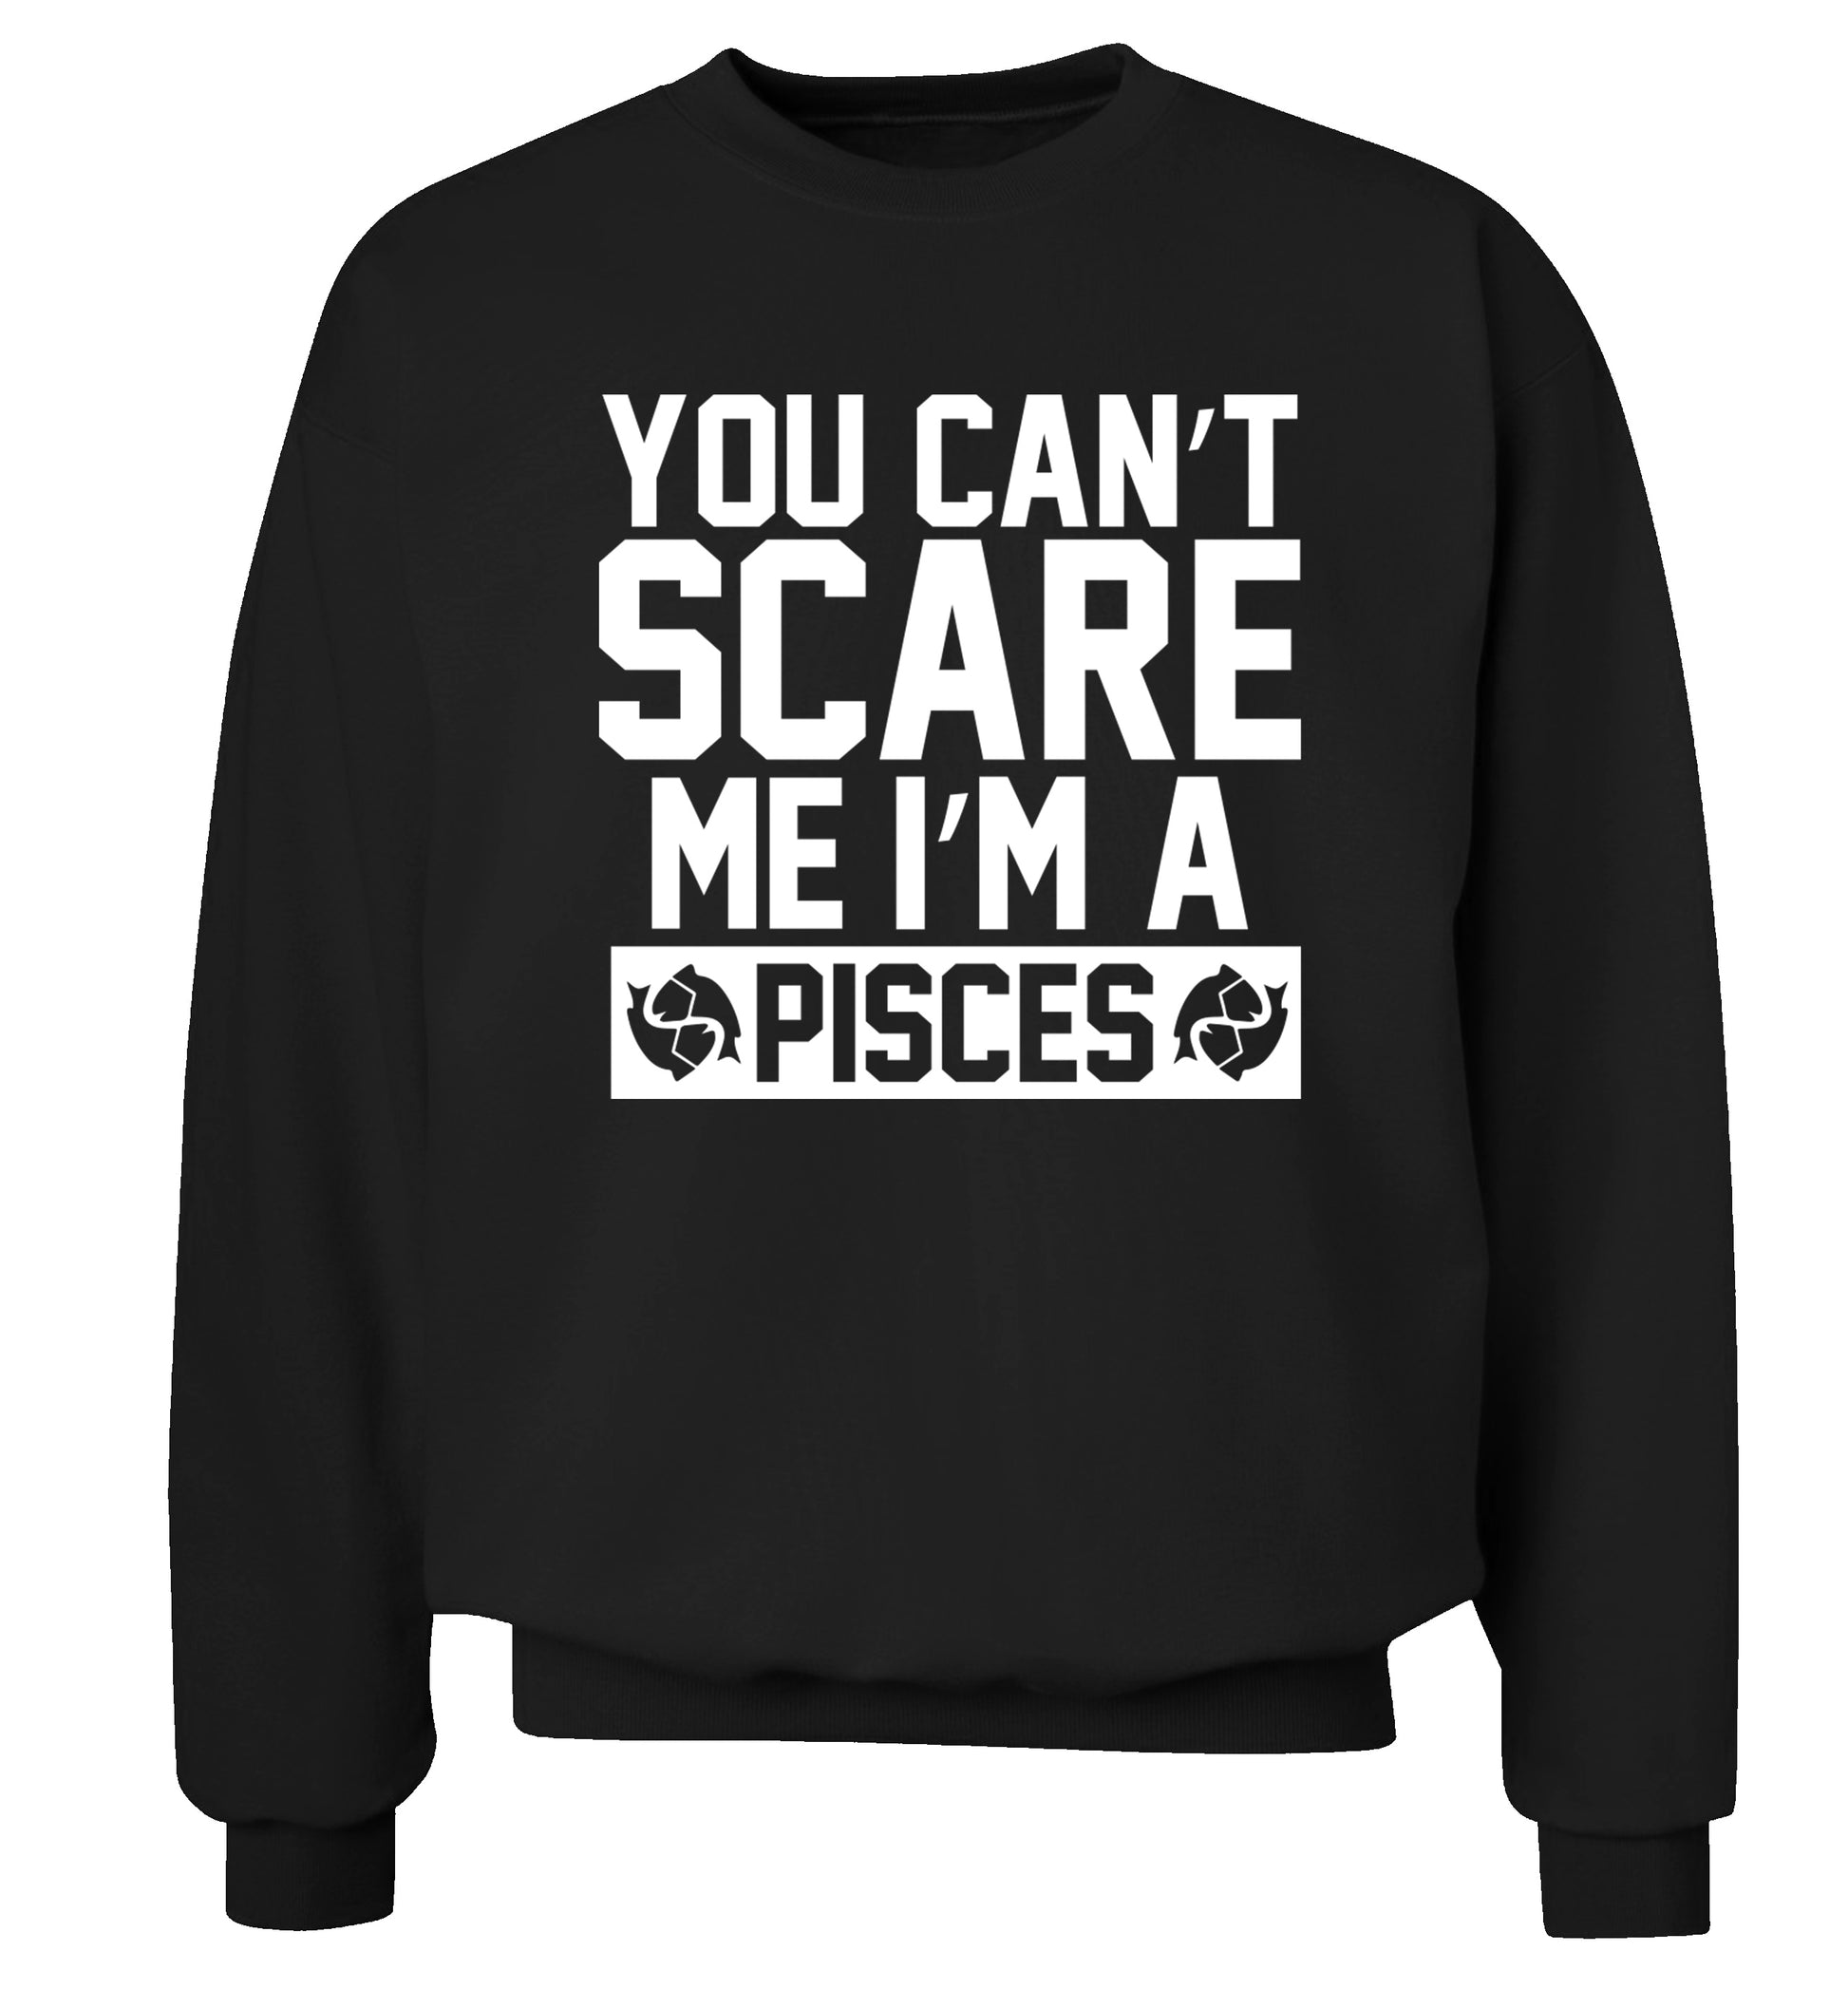 You can't scare me I'm a pisces Adult's unisex black Sweater 2XL